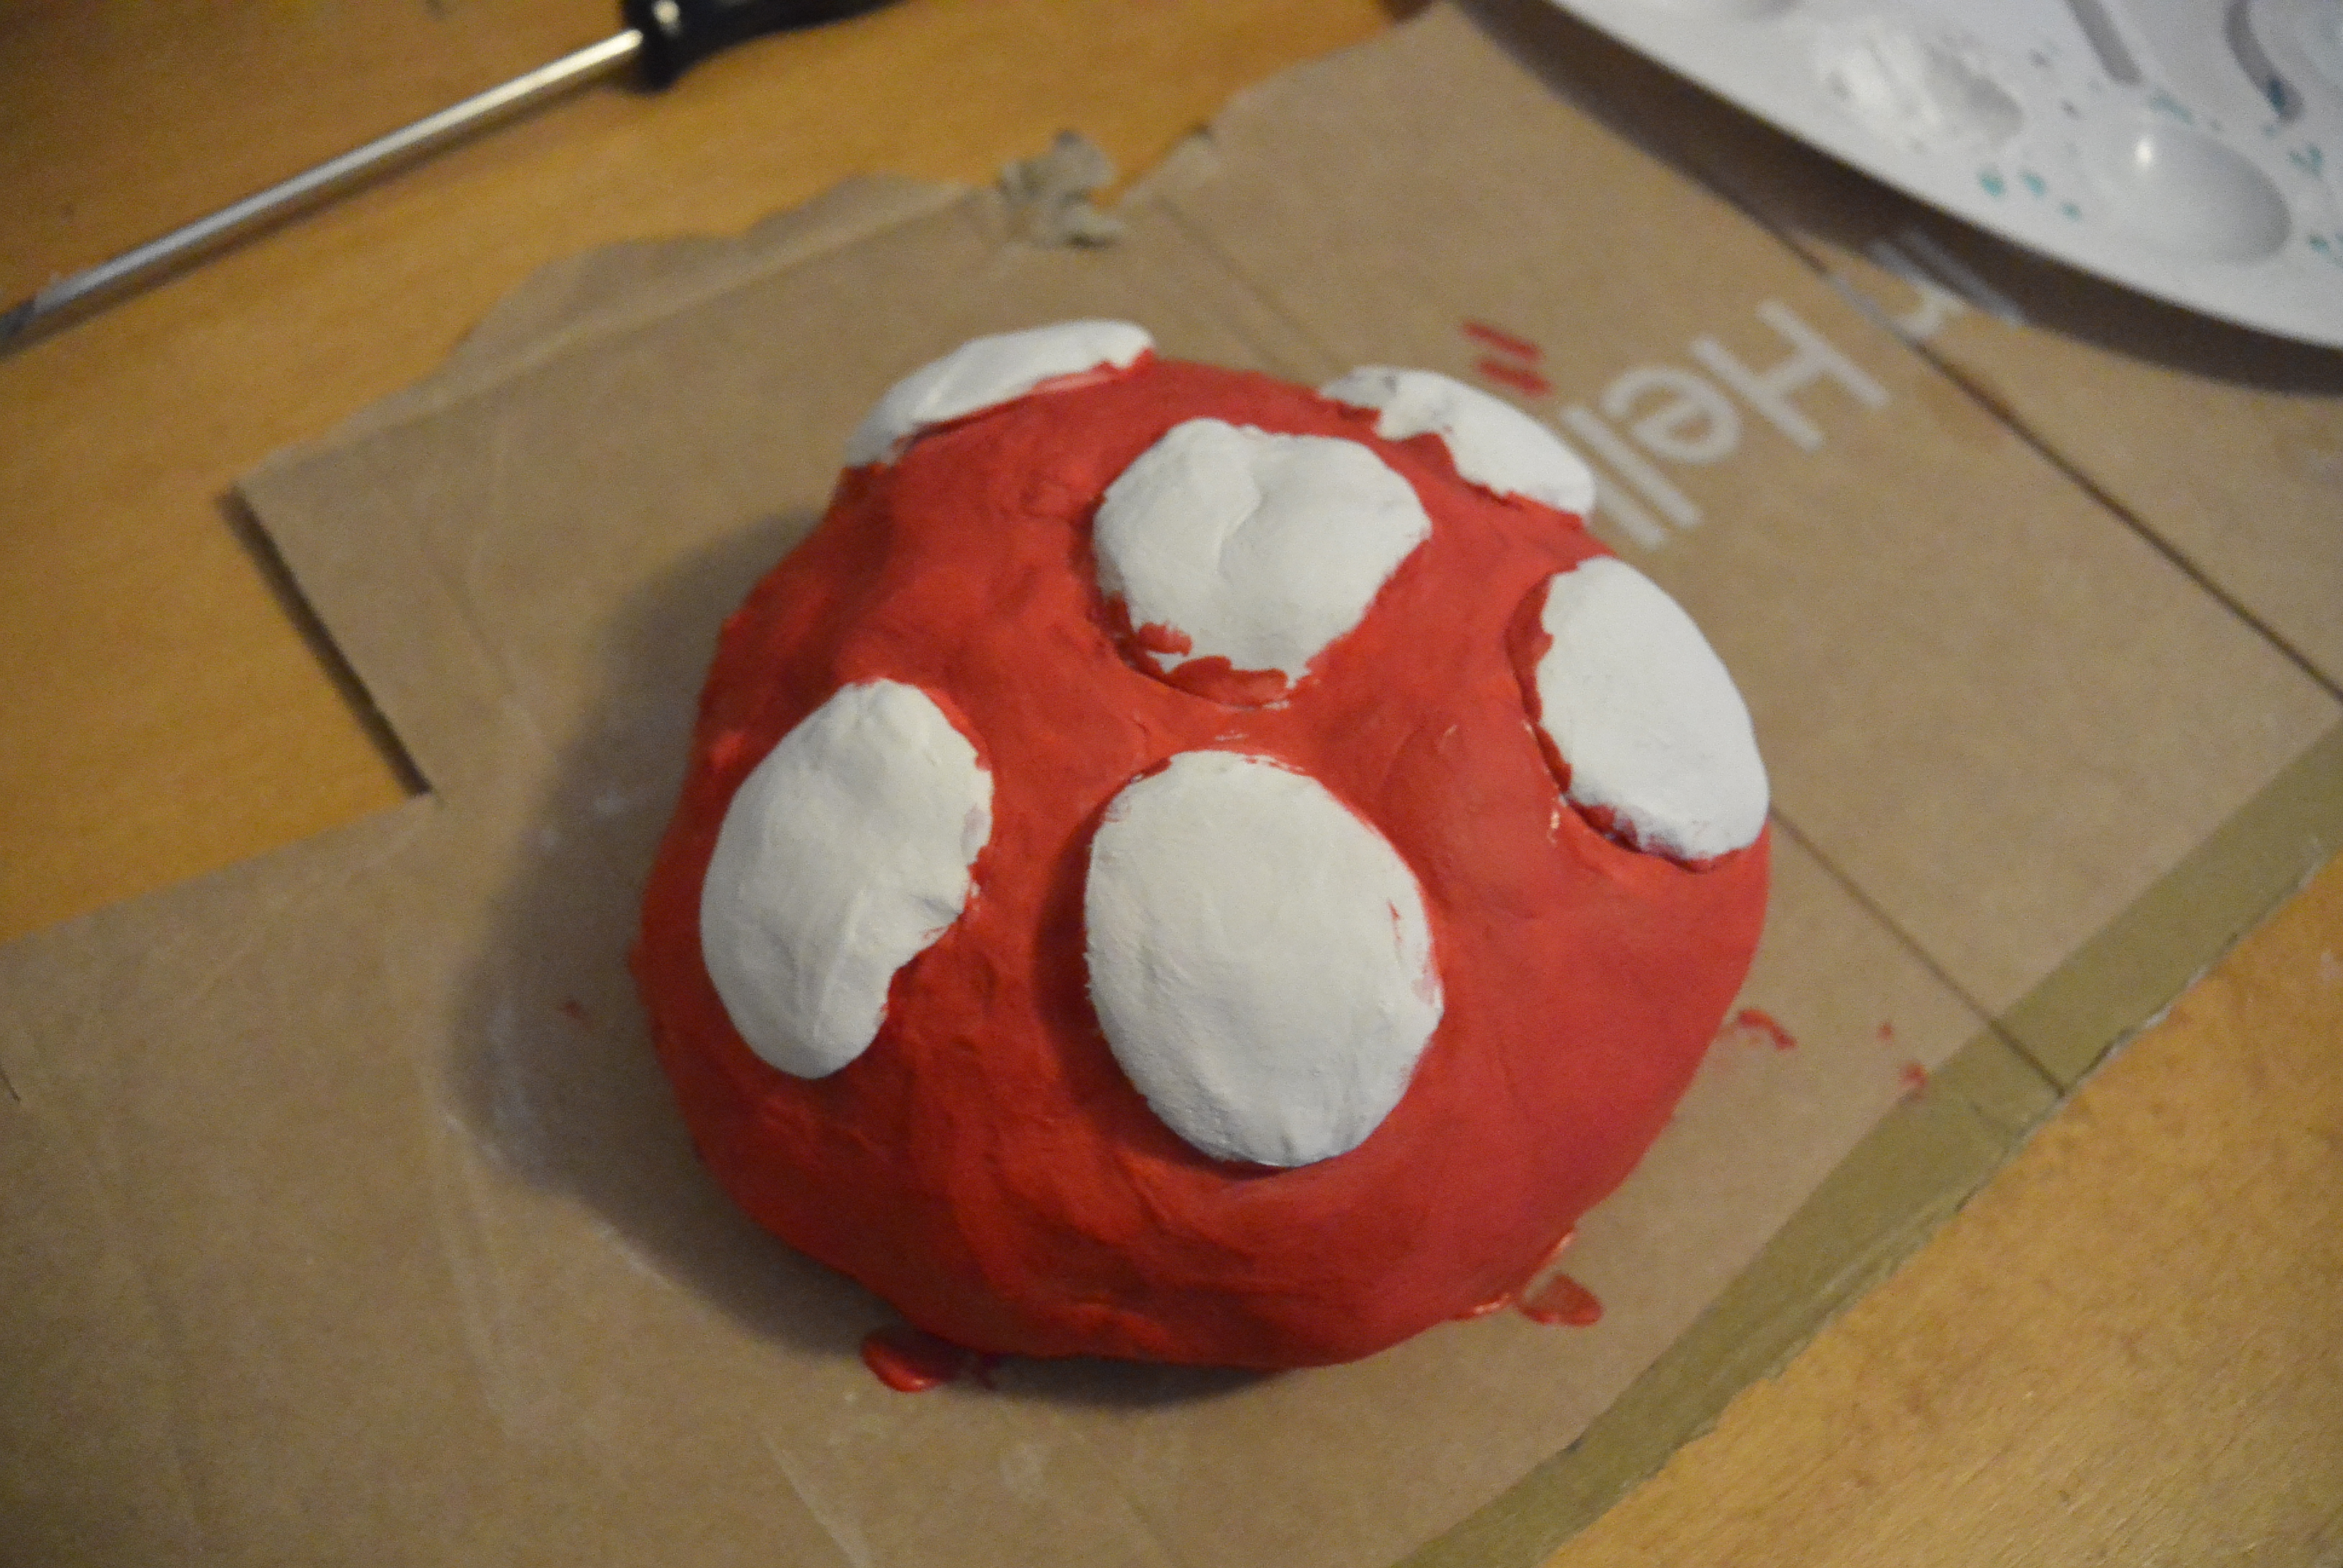 A picture of a painted top part of a mushroom, painted white and red